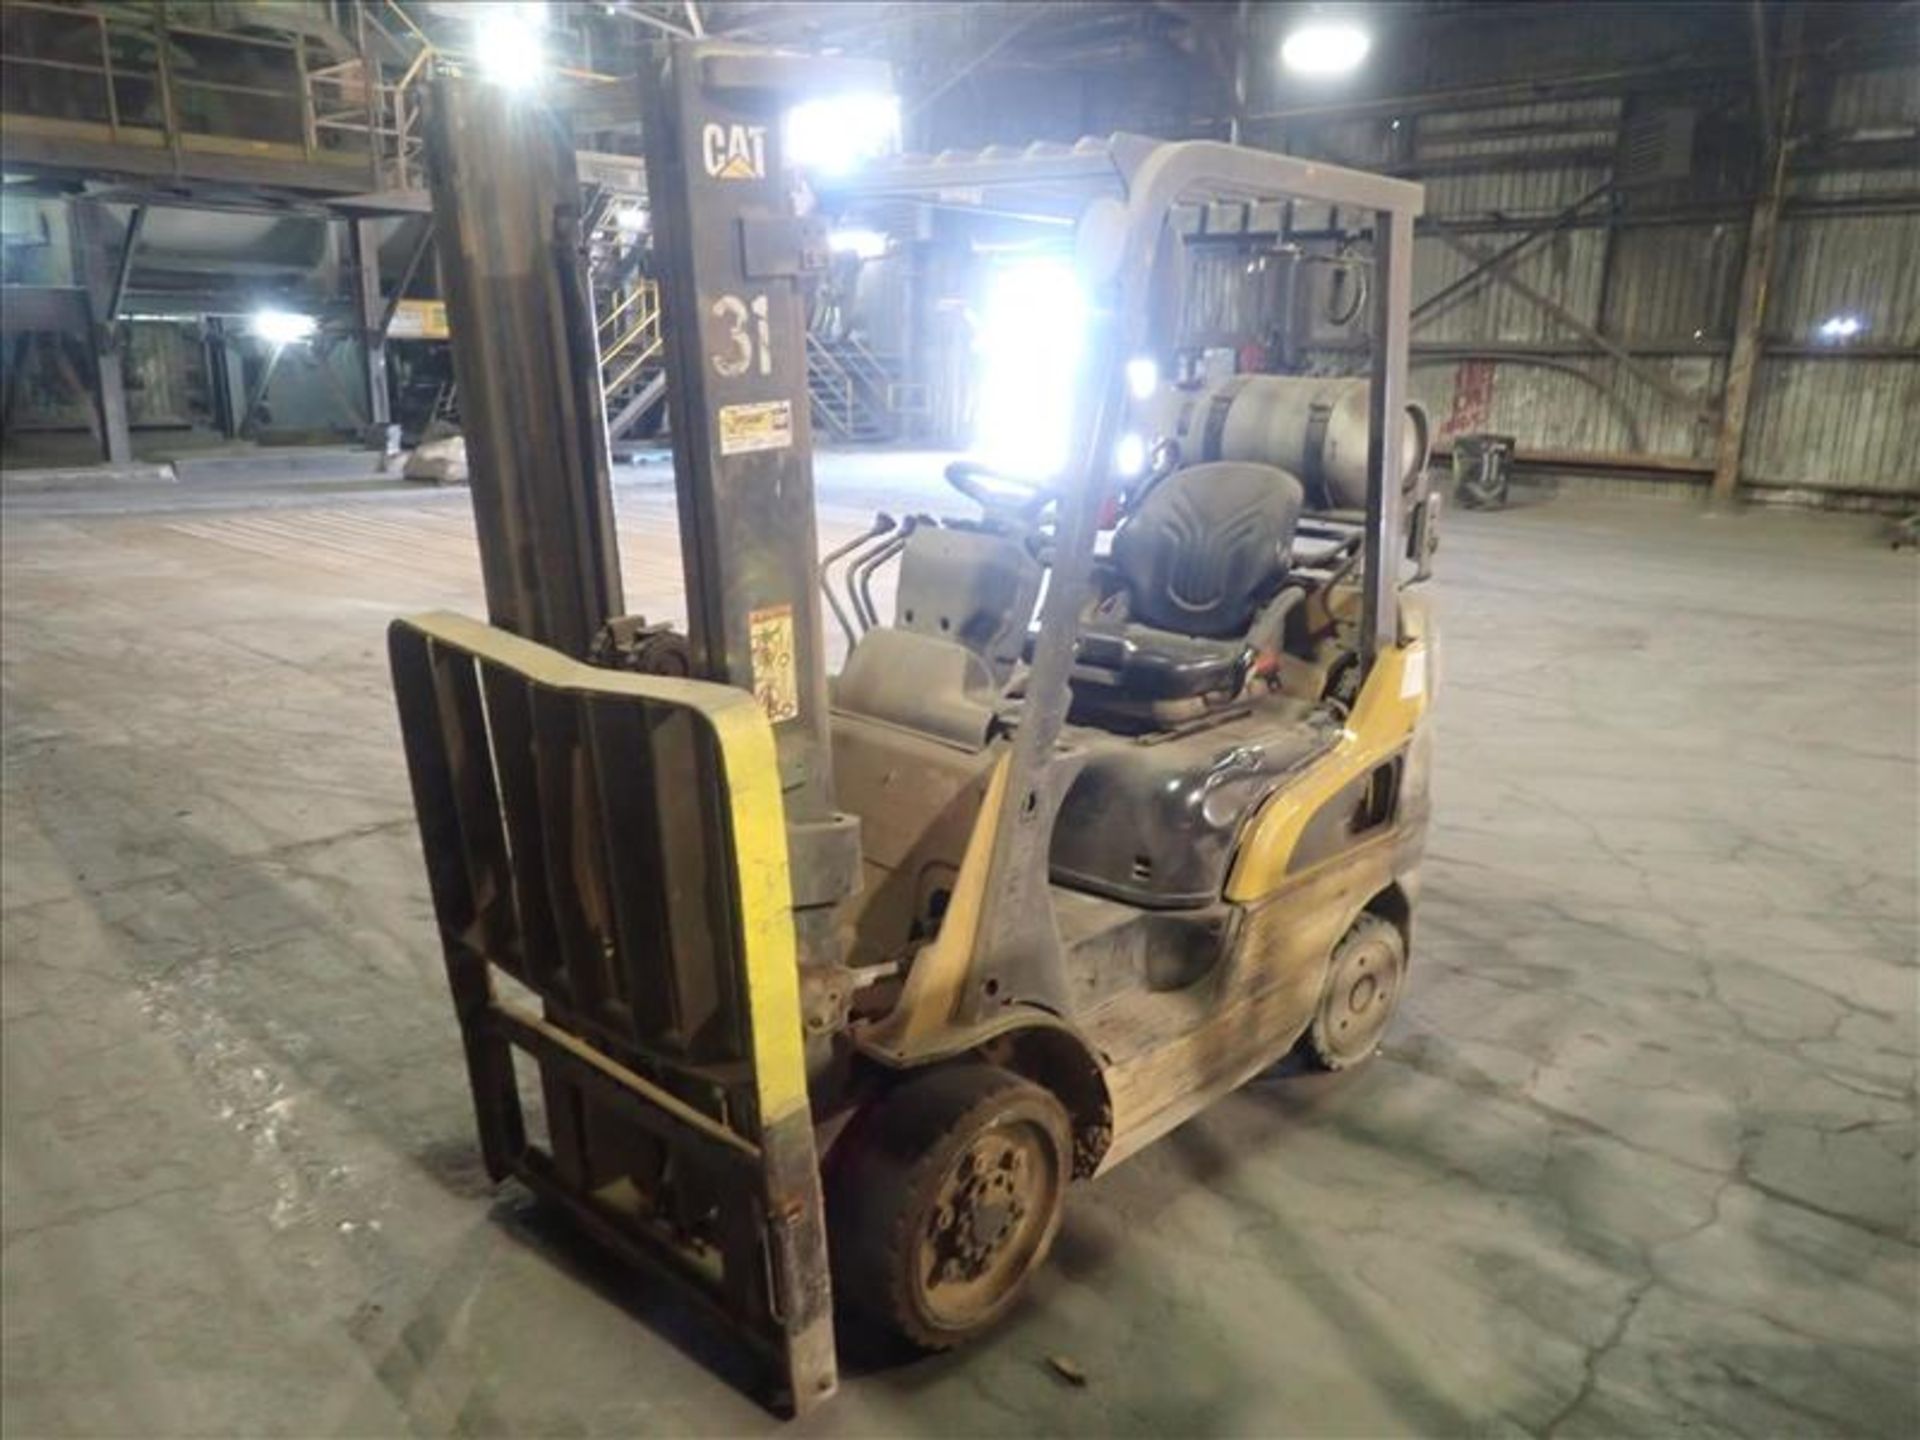 CAT forklift truck, mod. N/A, ser. no. N/A, N/A lbs cap., propane, 2-stage mast, hour meter reads